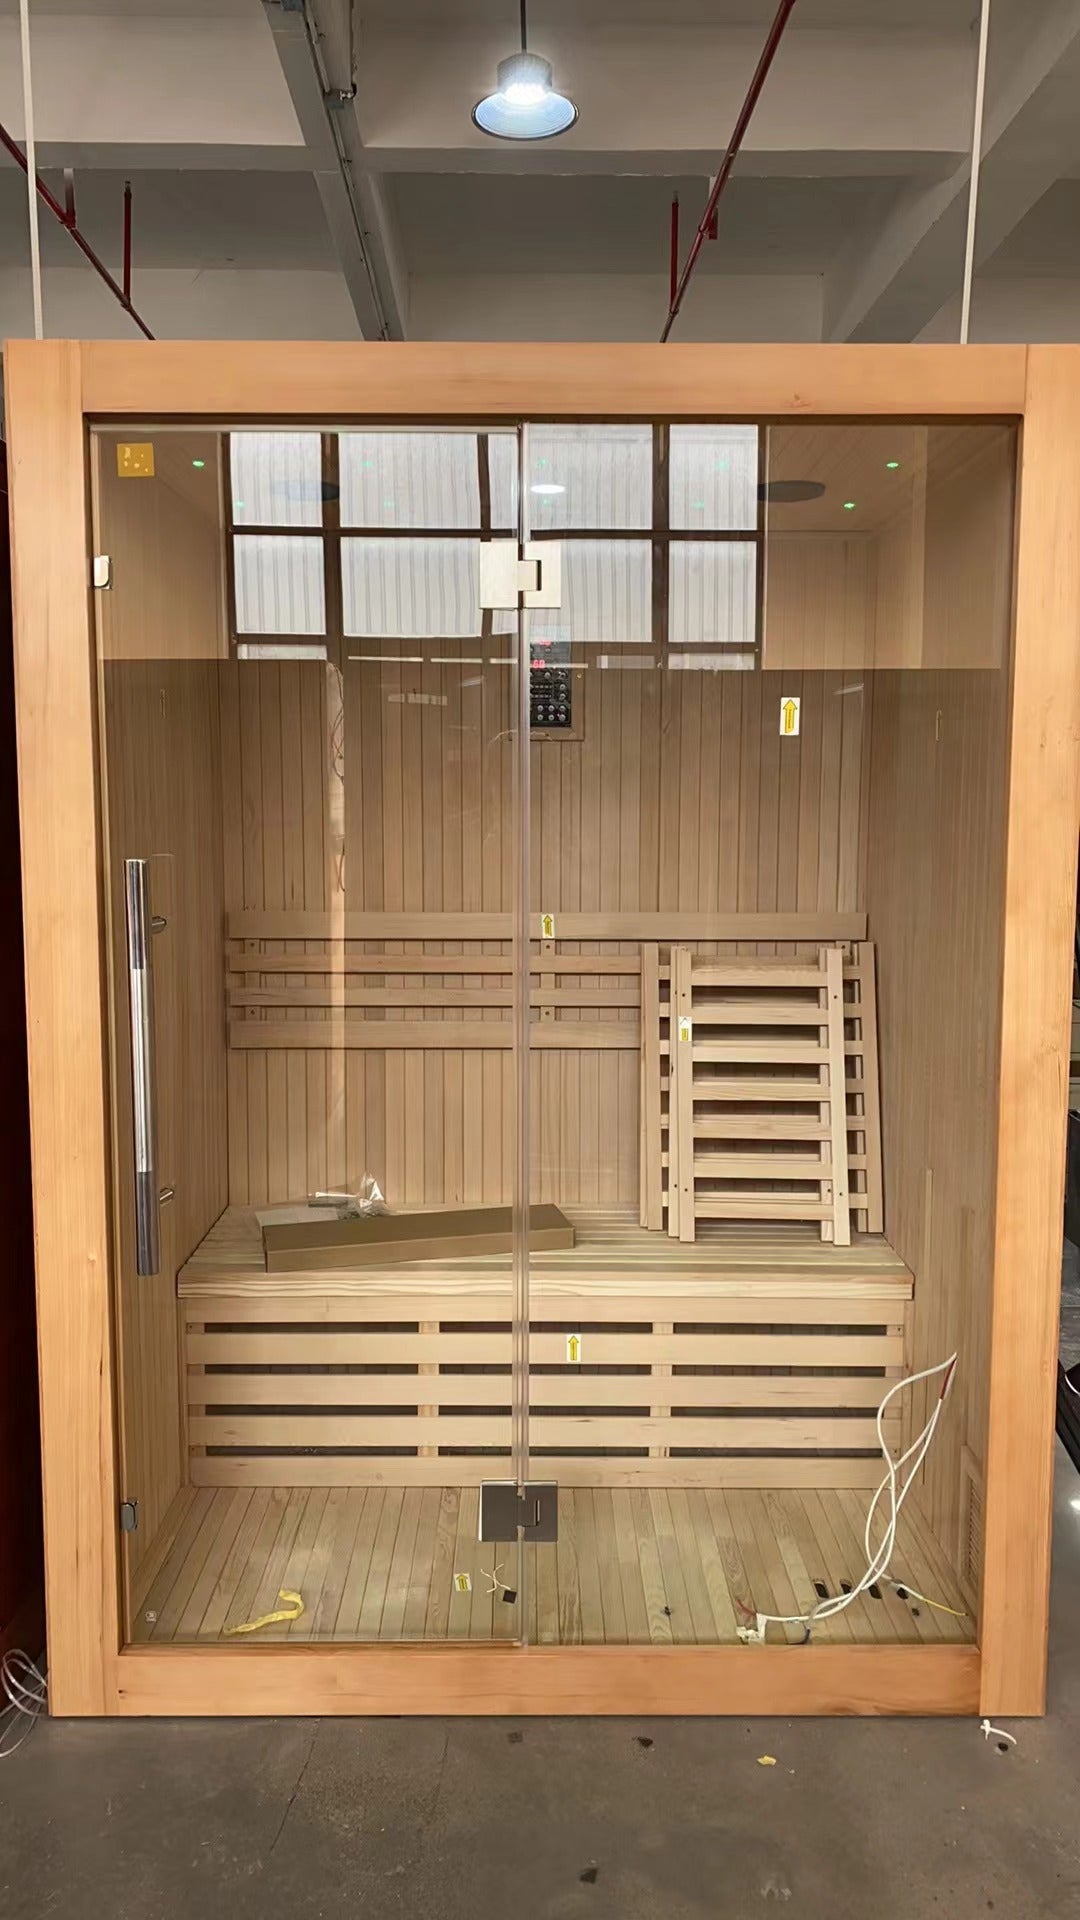 SAUNASNET® 2 Person Indoor Traditional Steam Sauna Glass 14 (In stock：20-25 days delivery)